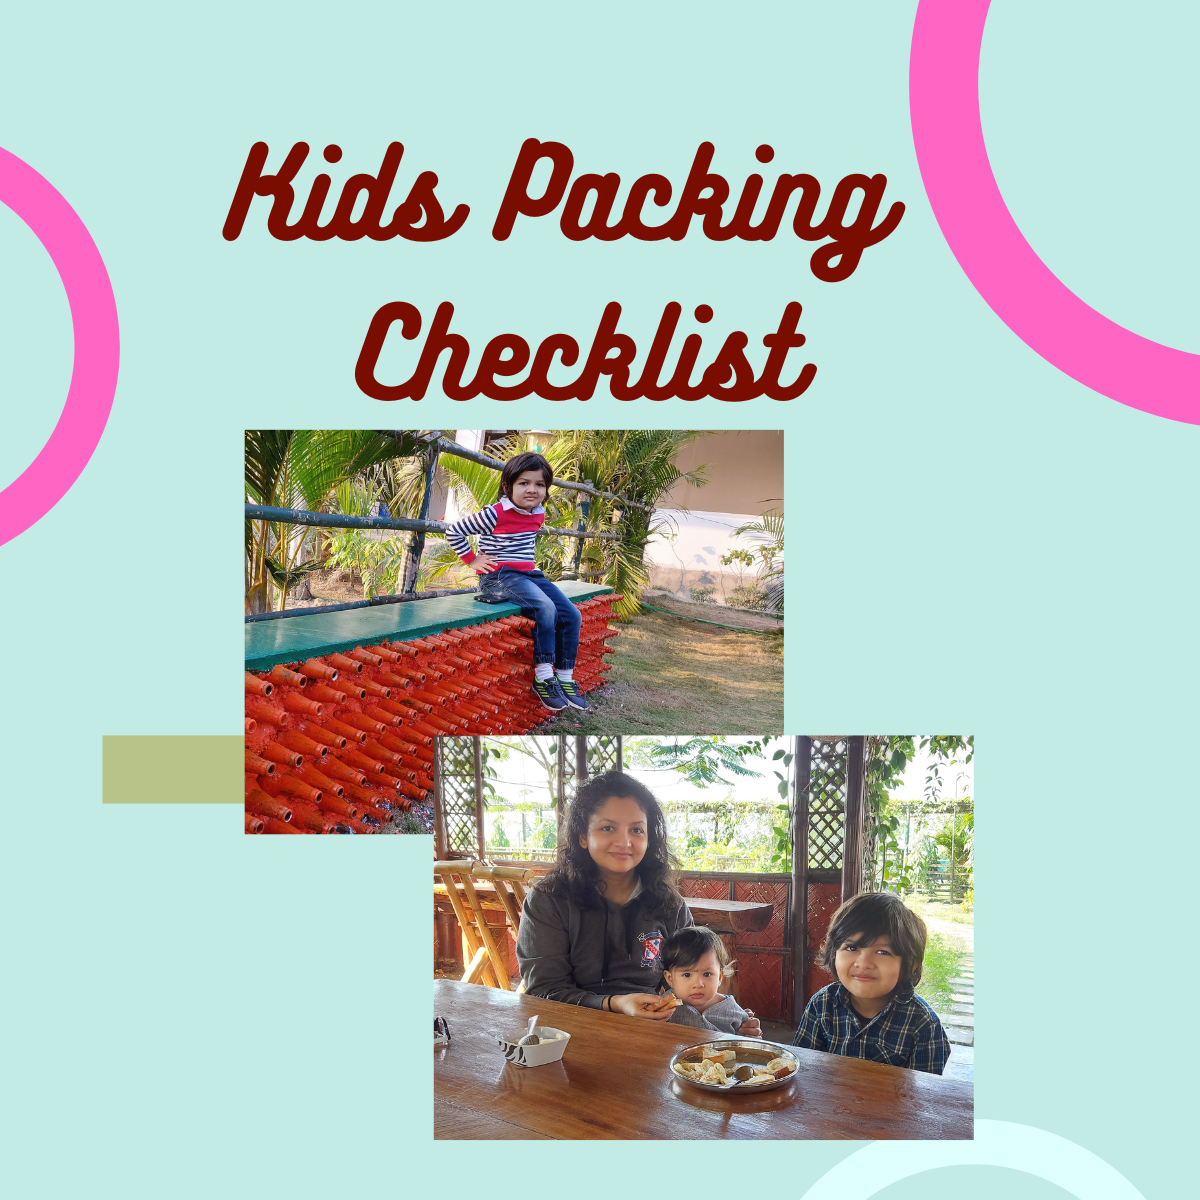 Kids Packing Checklist for one day outing